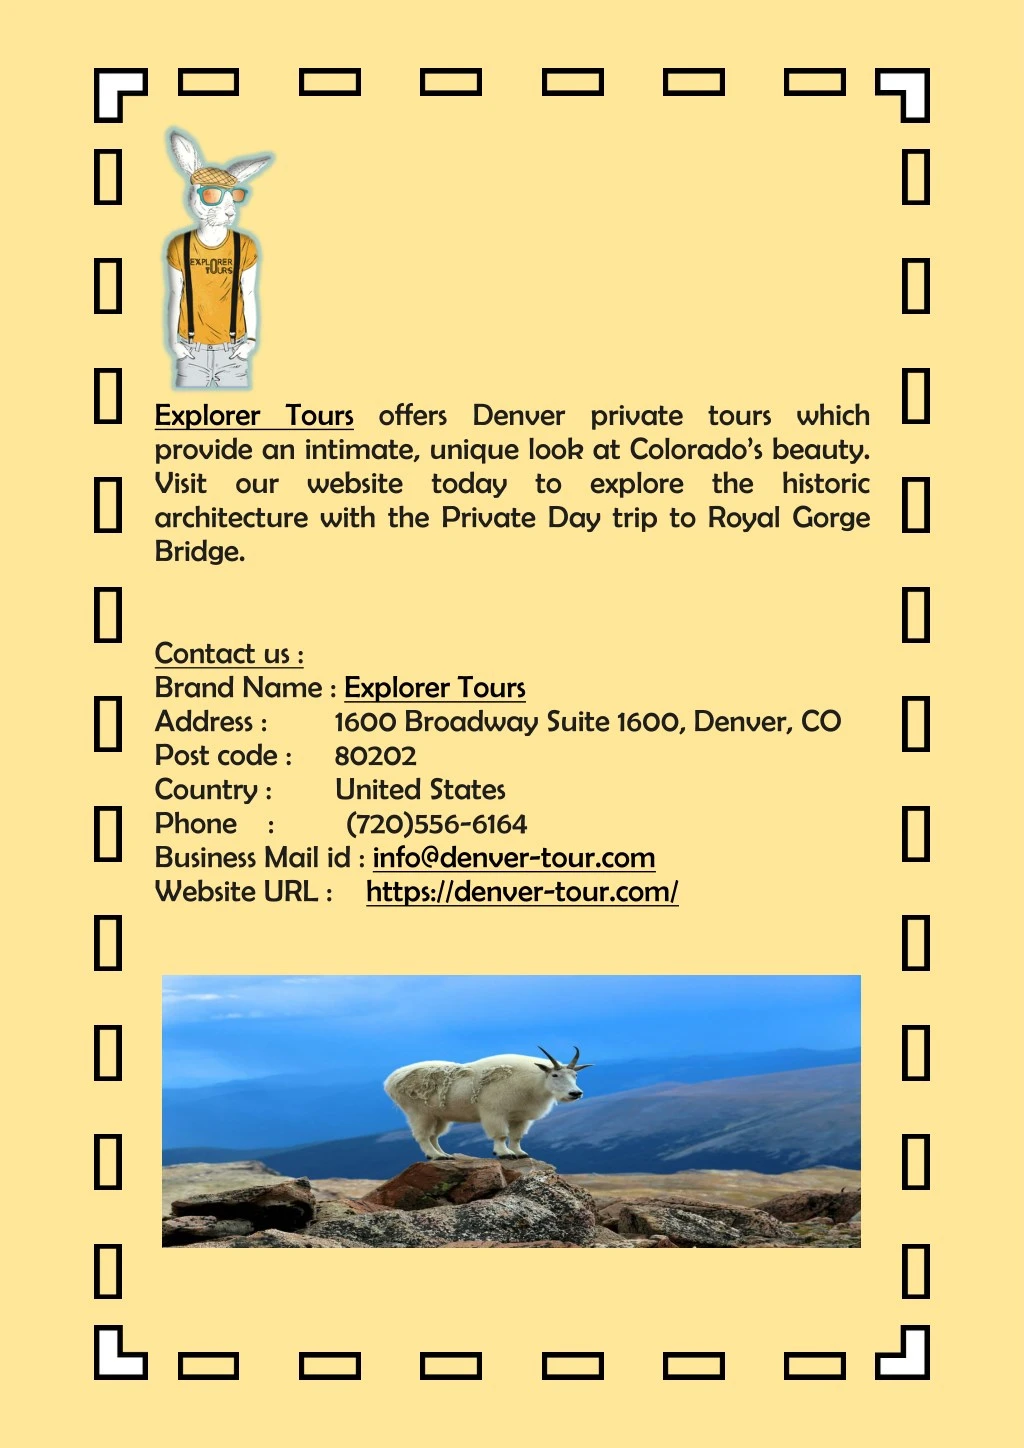 explorer tours offers denver private tours which